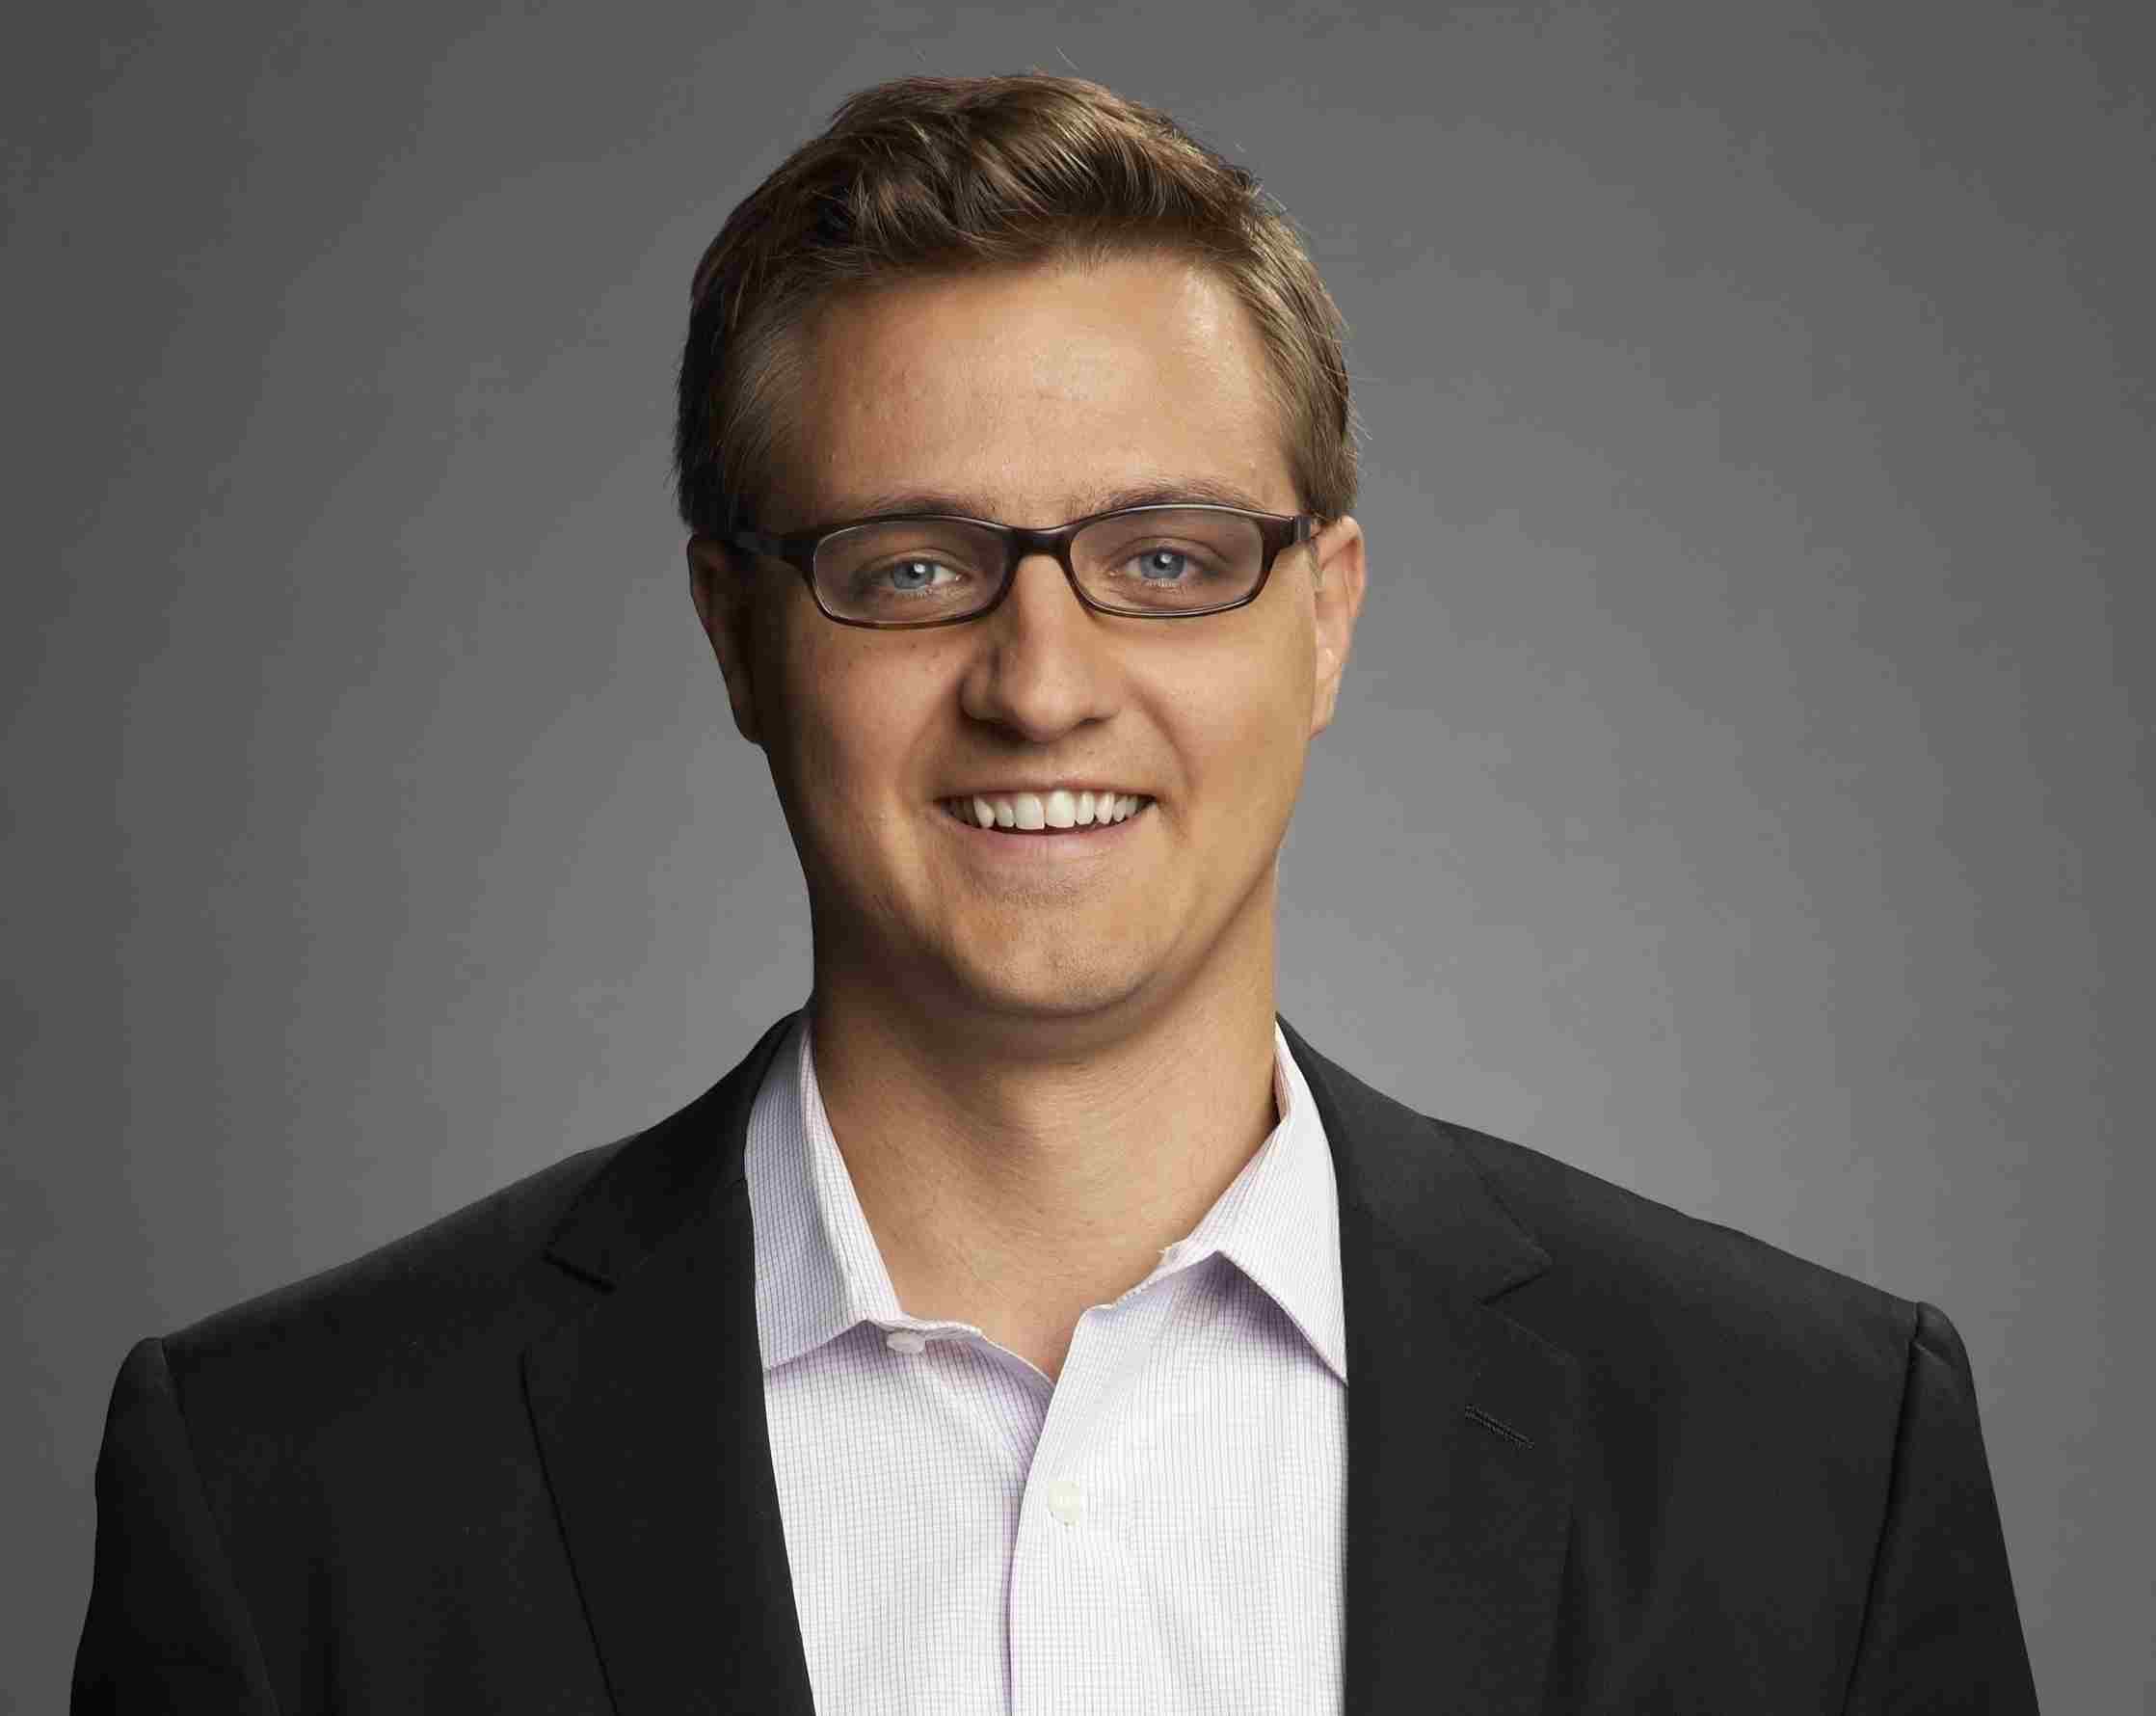 Image of news anchor, author, editor, and host, Christopher Hayes